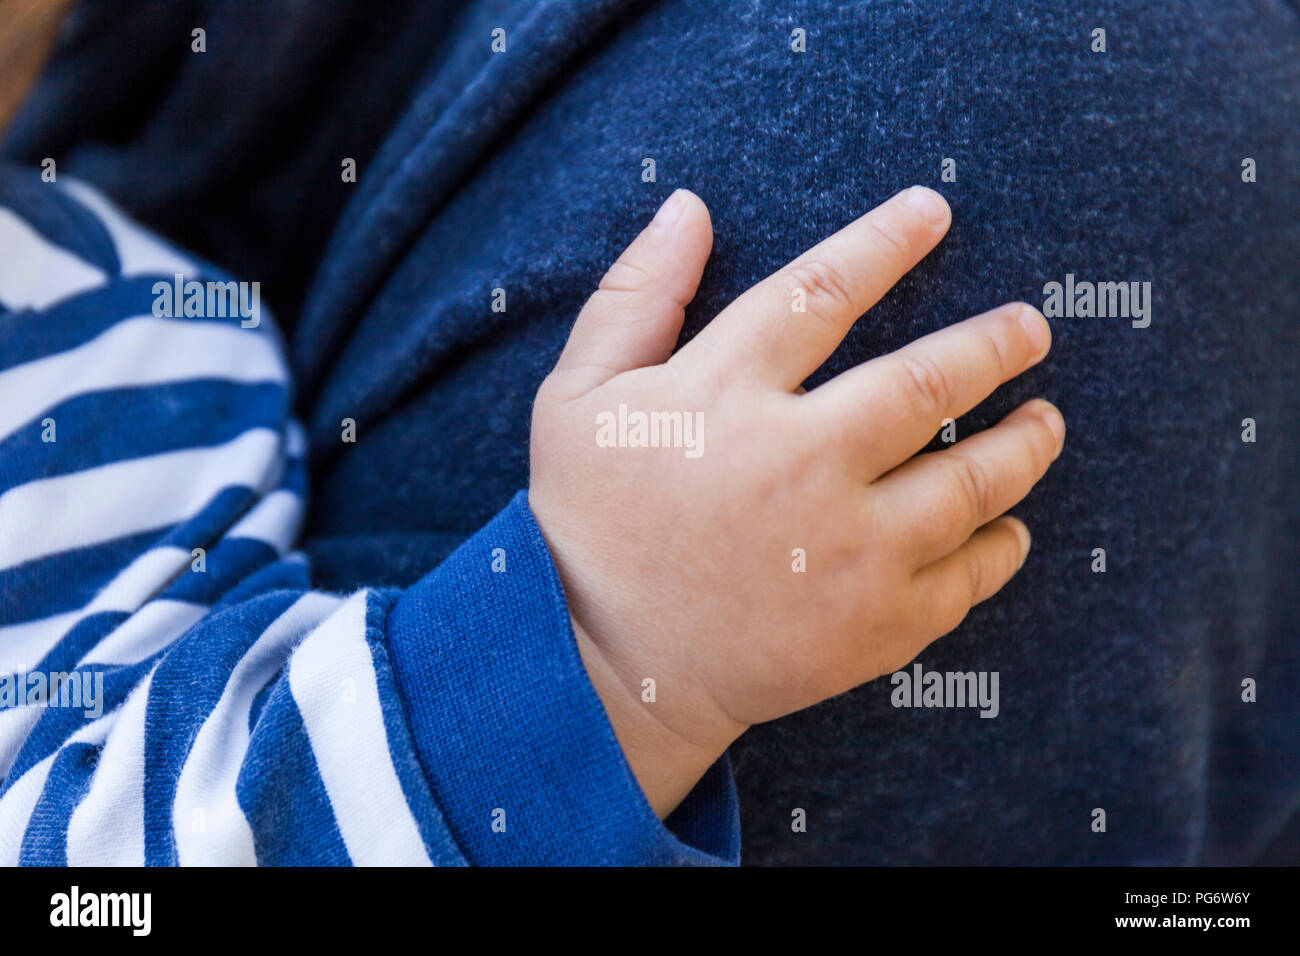 Hand of baby boy on father's shoulder, close-up Stock Photo